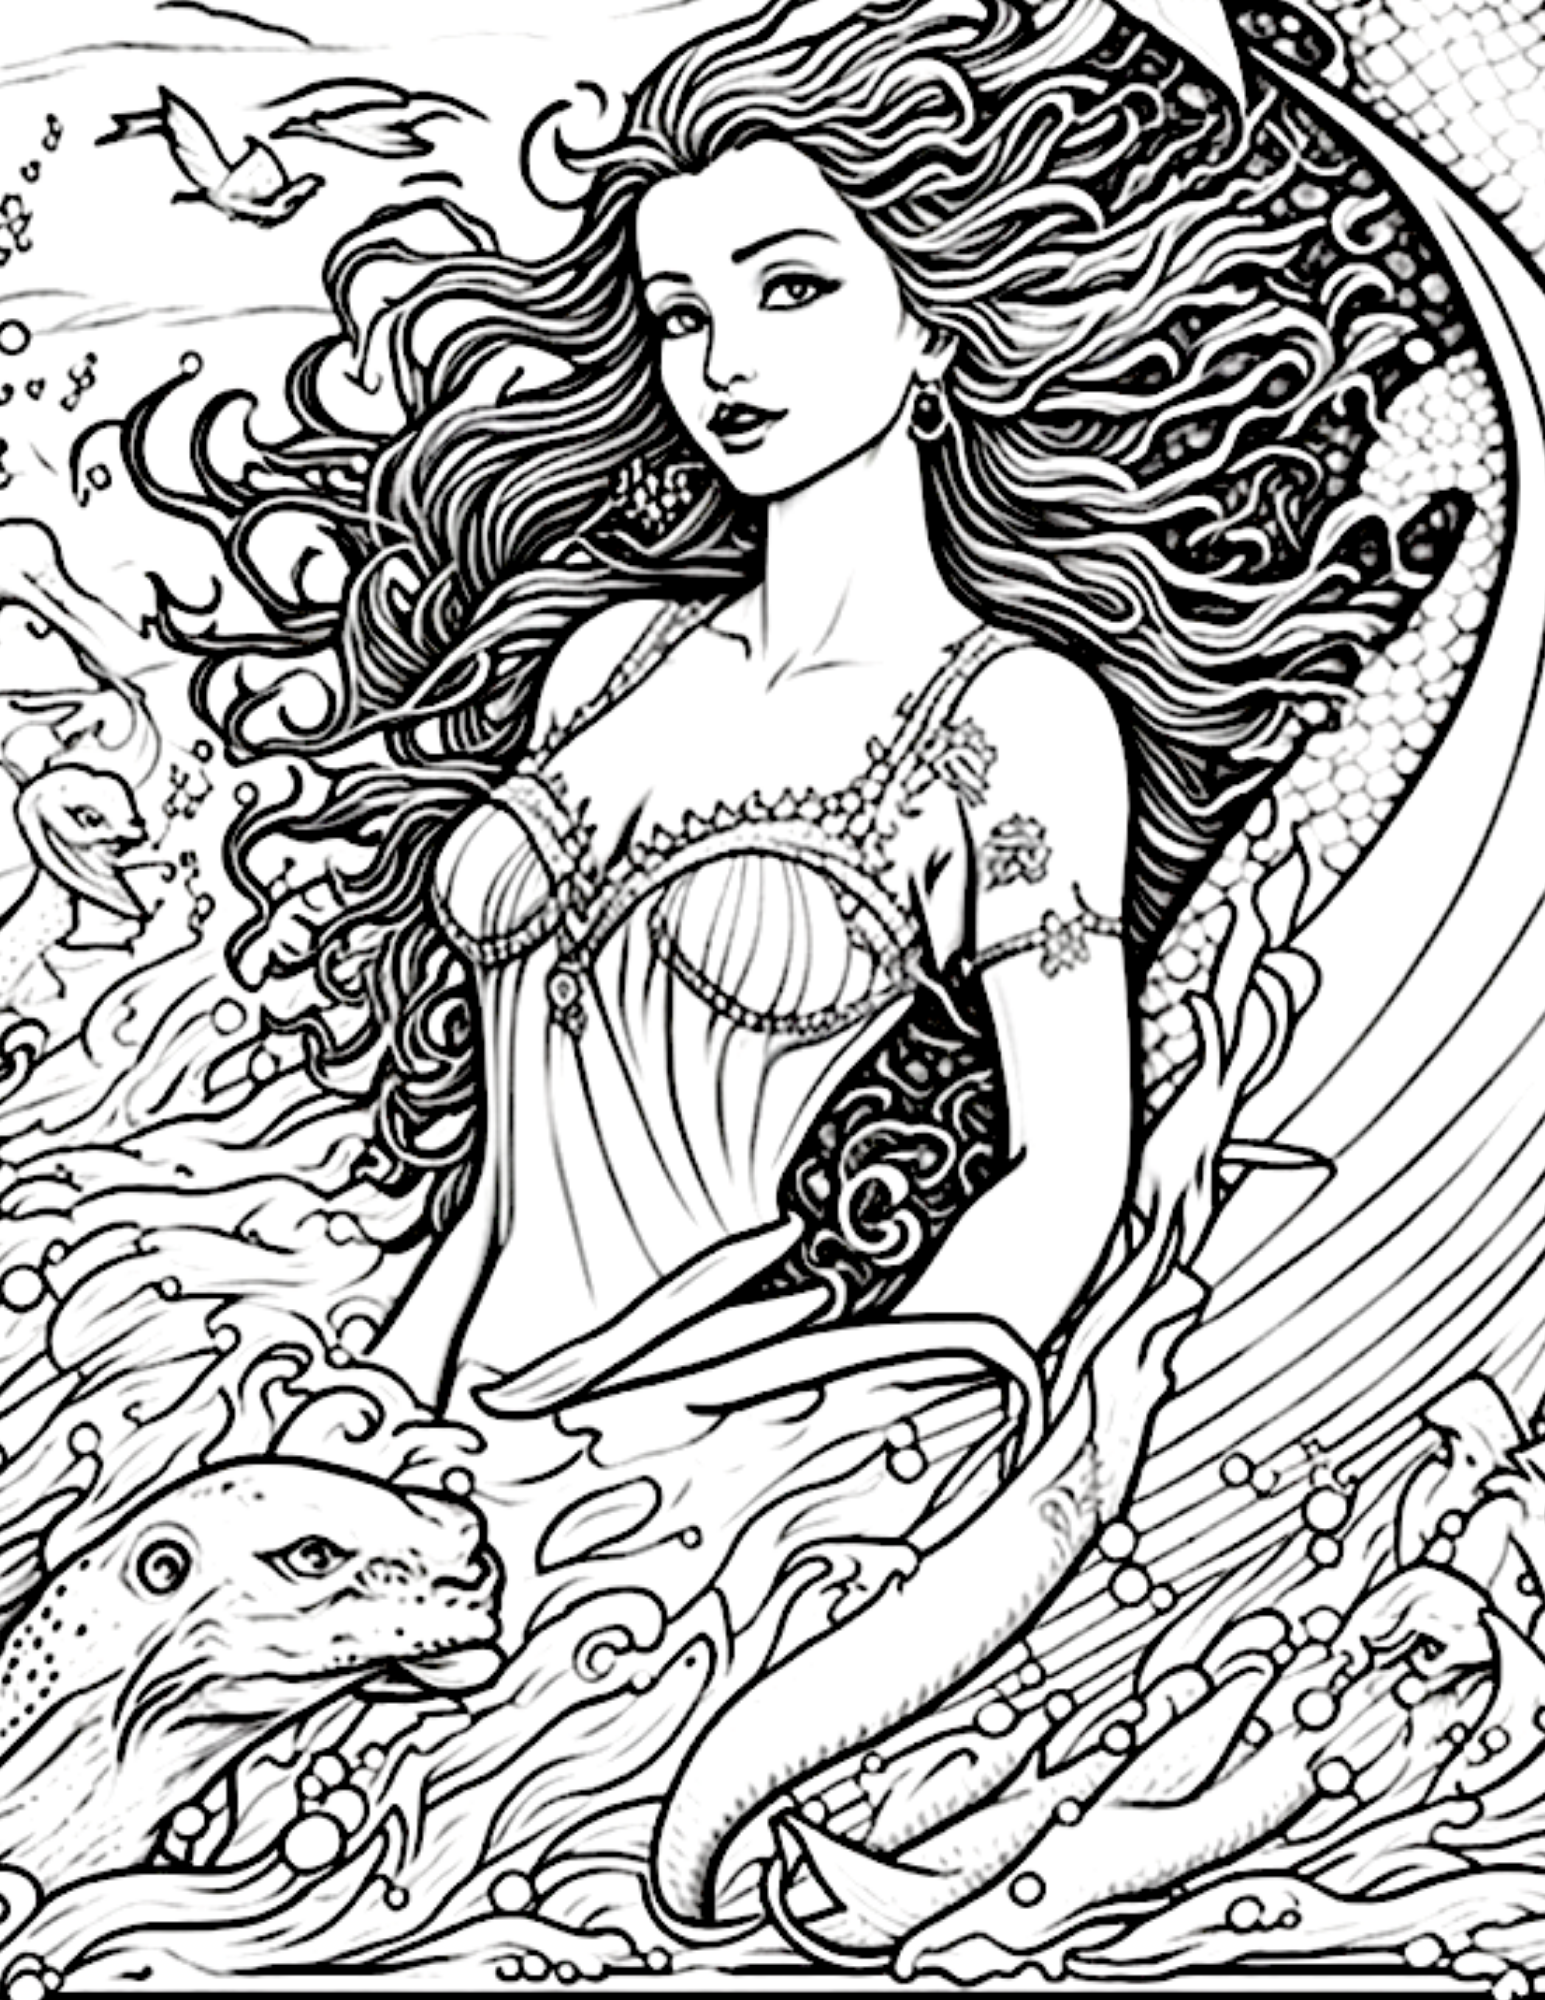 Sexy Mermaid Adult Coloring Book for Digital Devices — JINCEY LUMPKIN